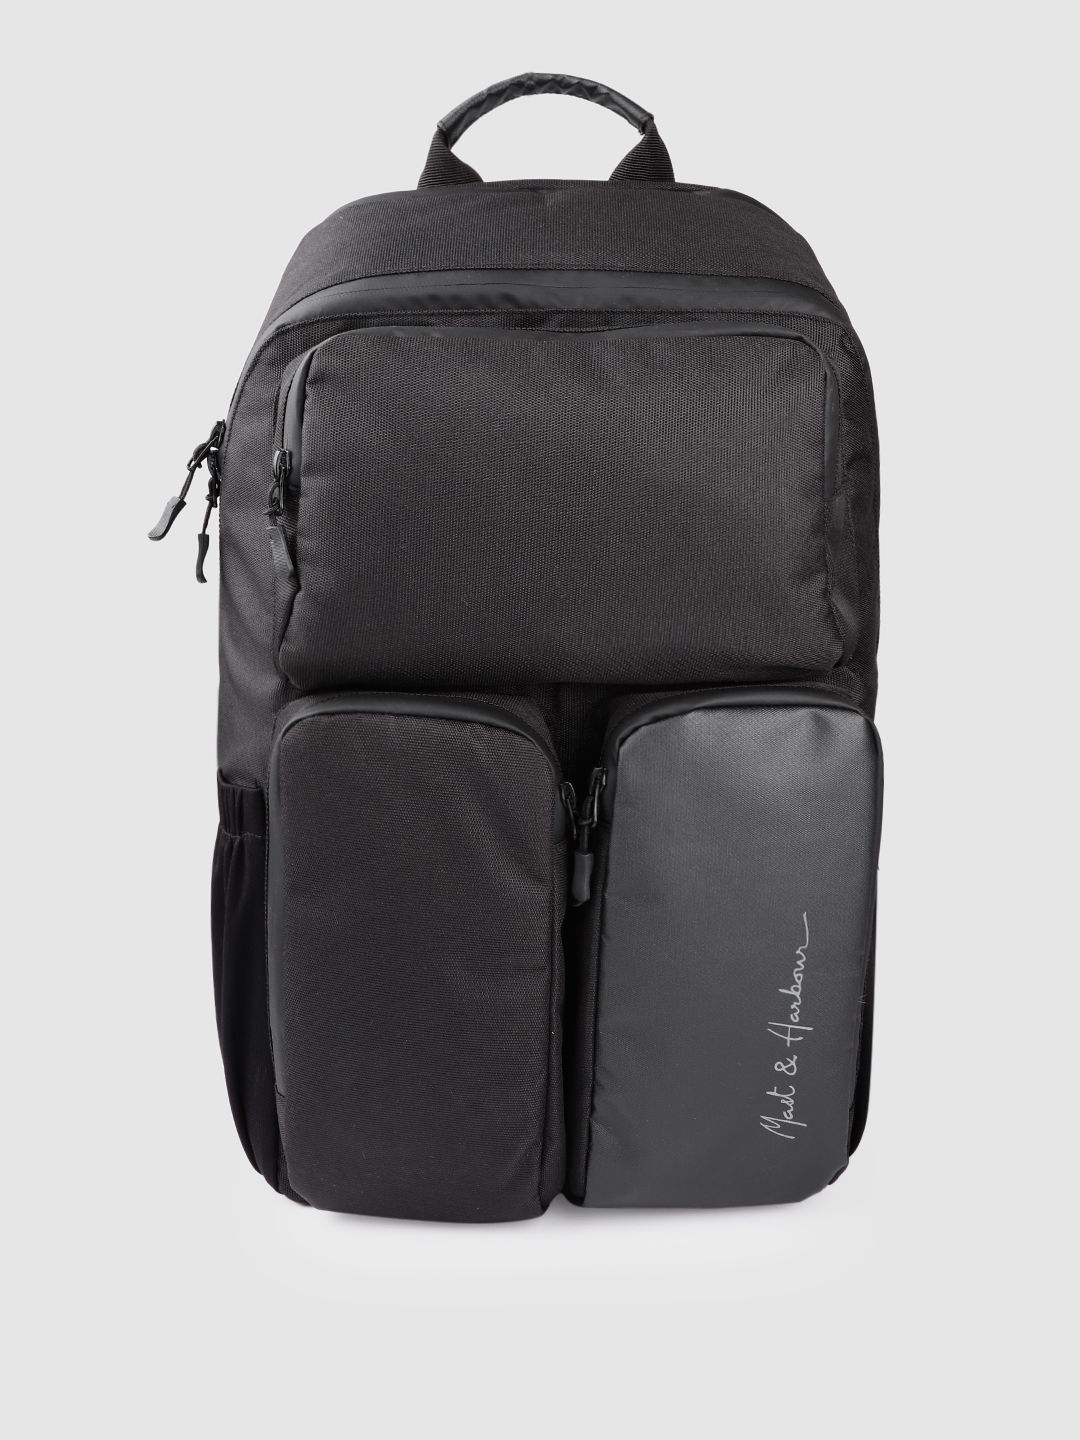 Mast & Harbour Unisex Black Solid Backpack 27.3 L Price in India